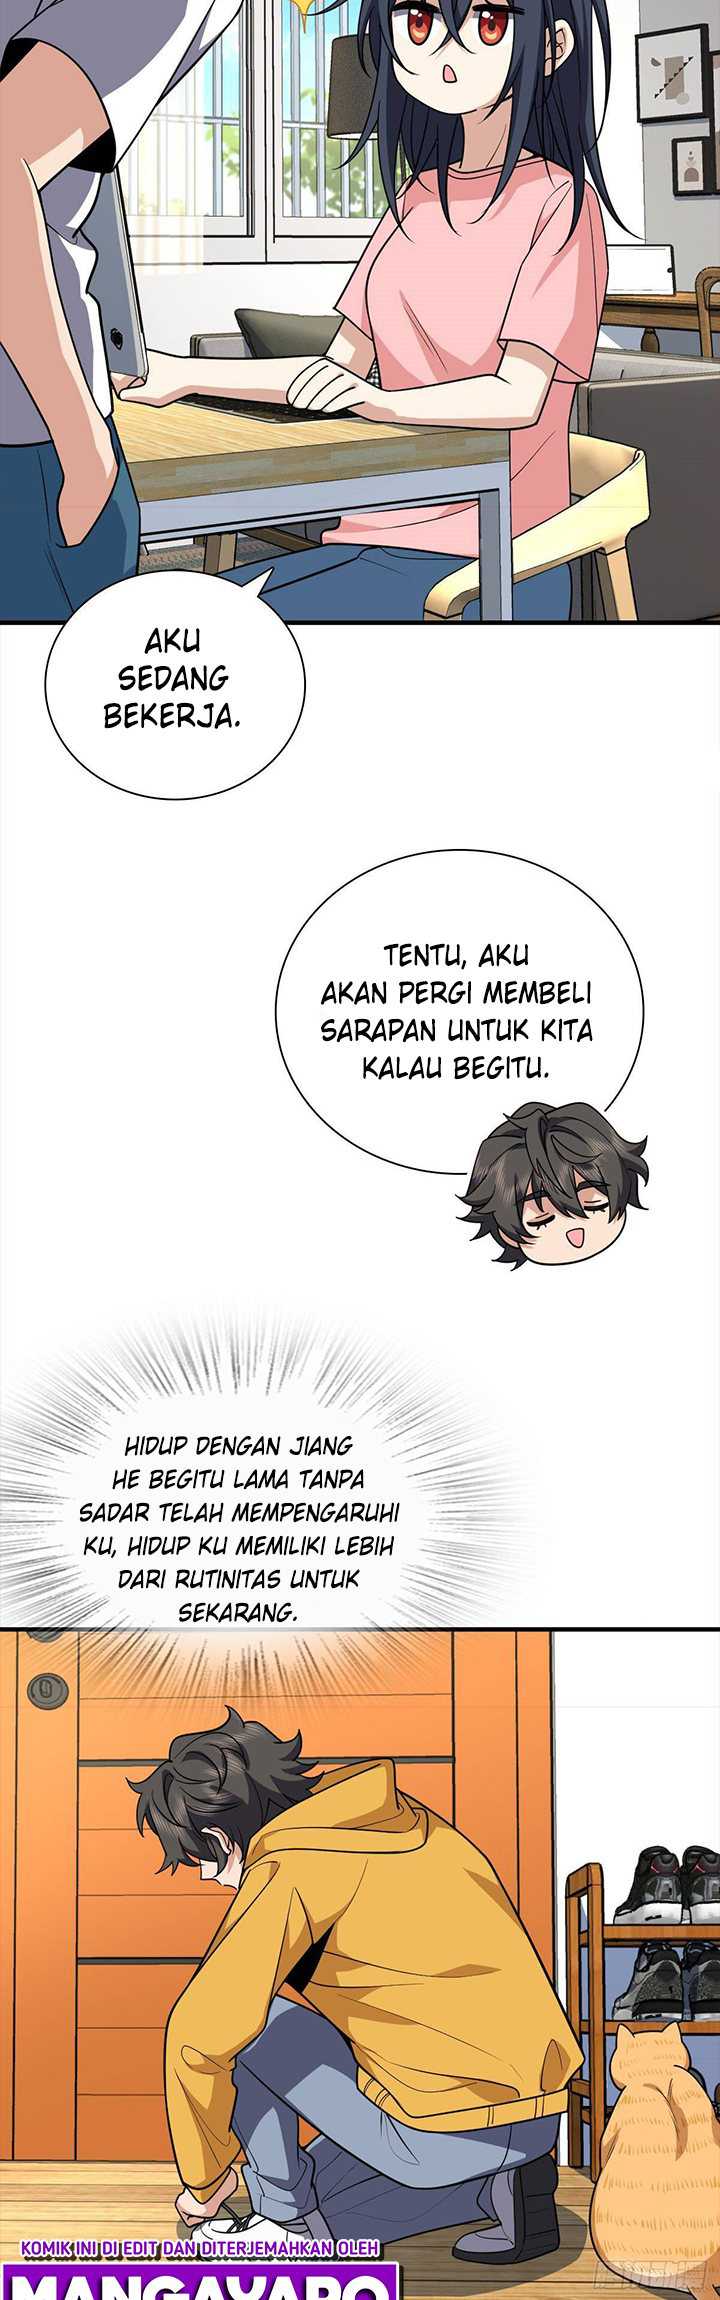 My Wife Is From a Thousand Years Ago Chapter 37 Bahasa Indonesia